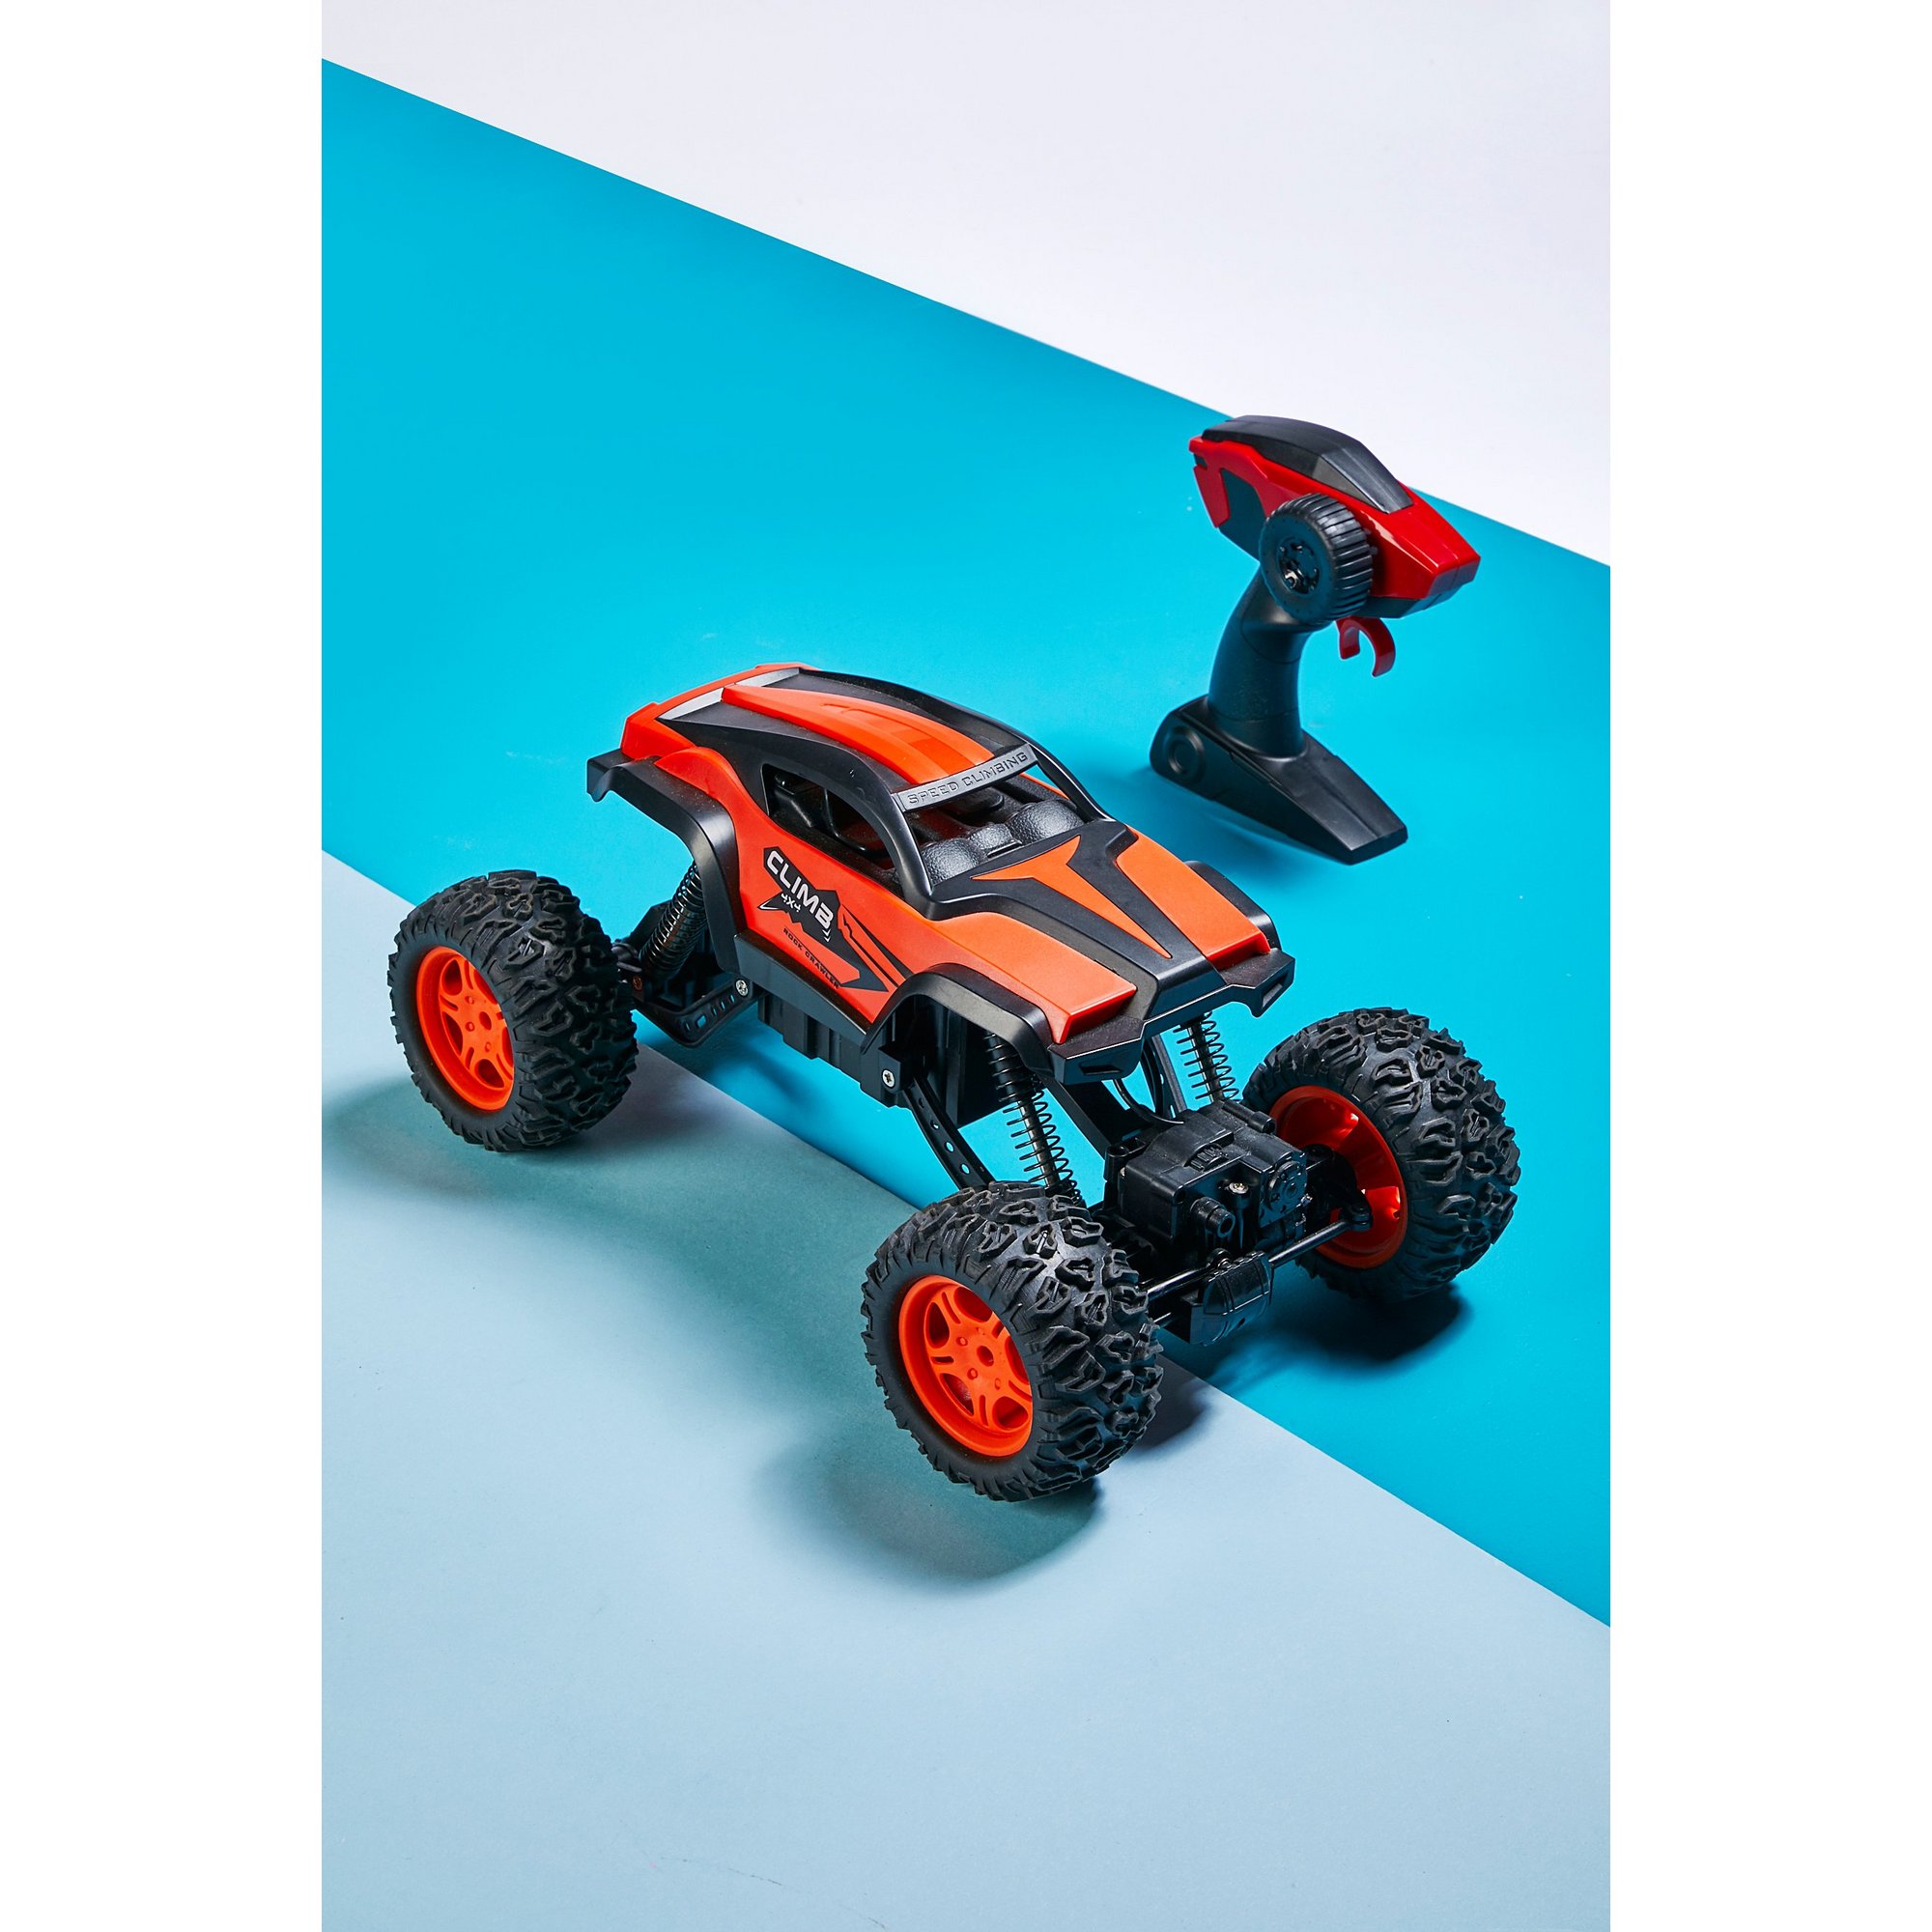 Image of 1:12 Scale Remote Control 2.4 GHz Monster Truck